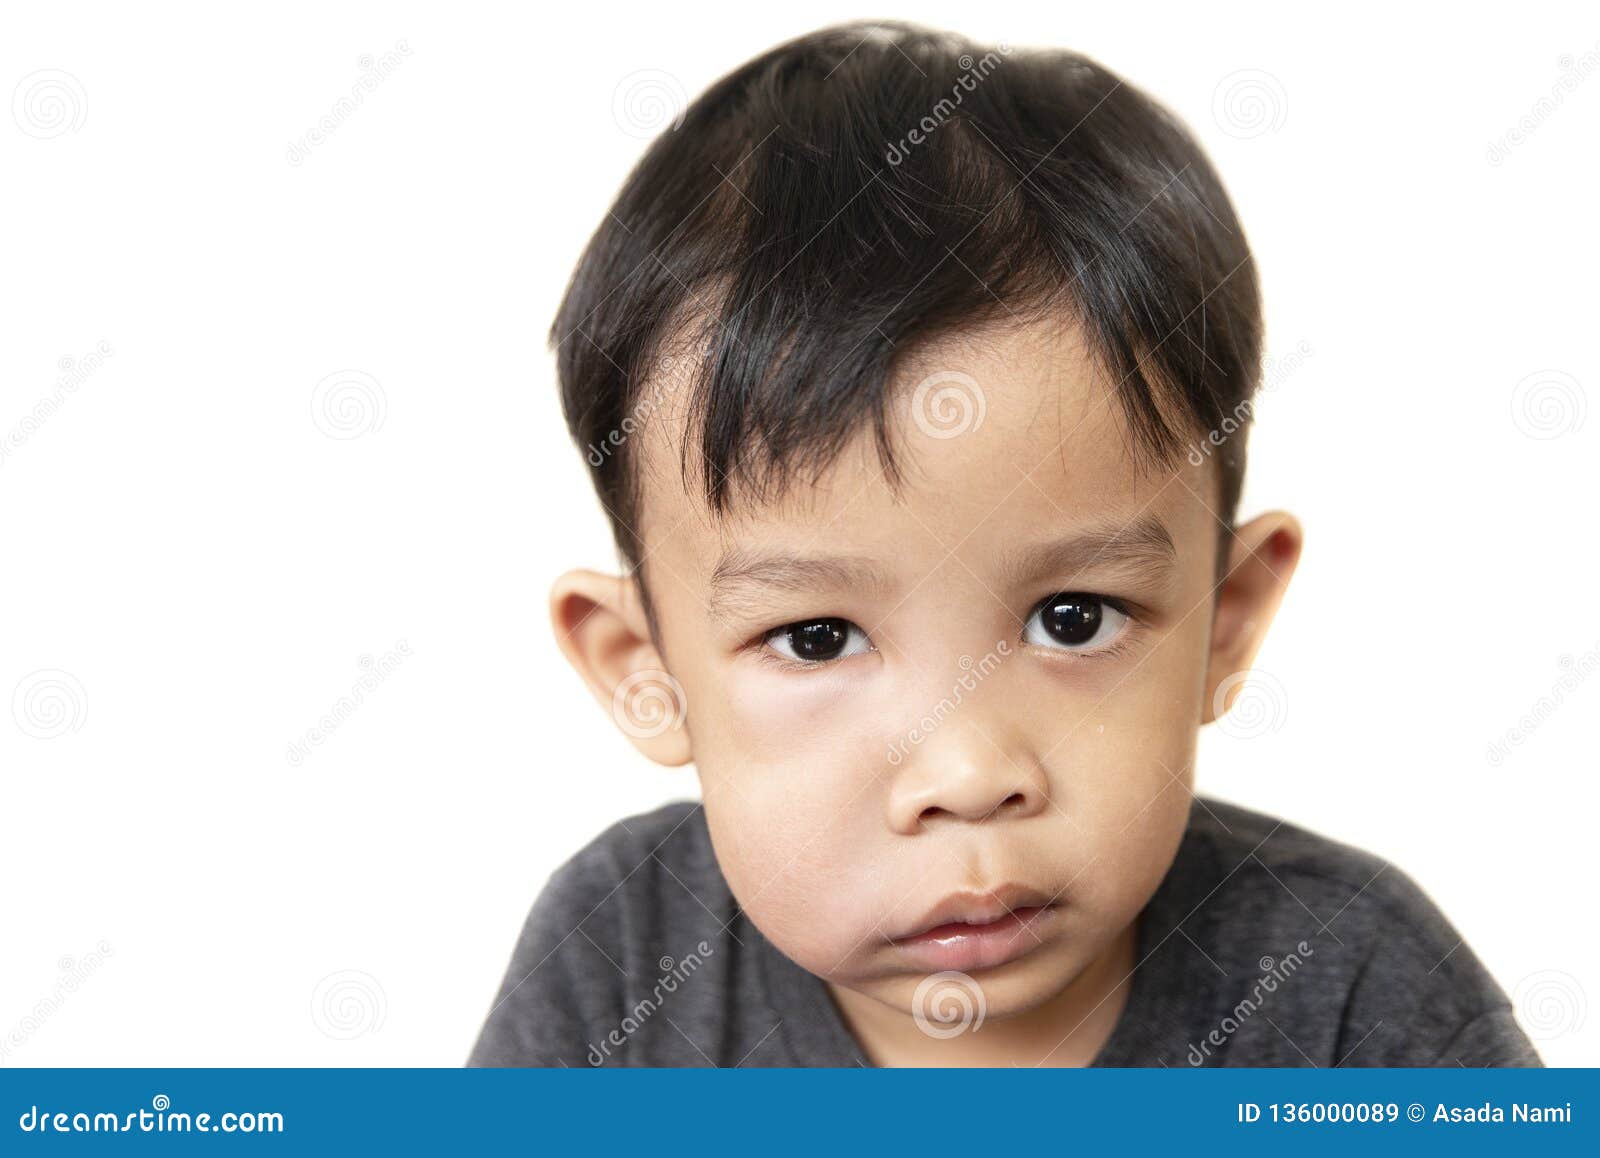 swollen face of asian kid suffering from health problem and aching tooth